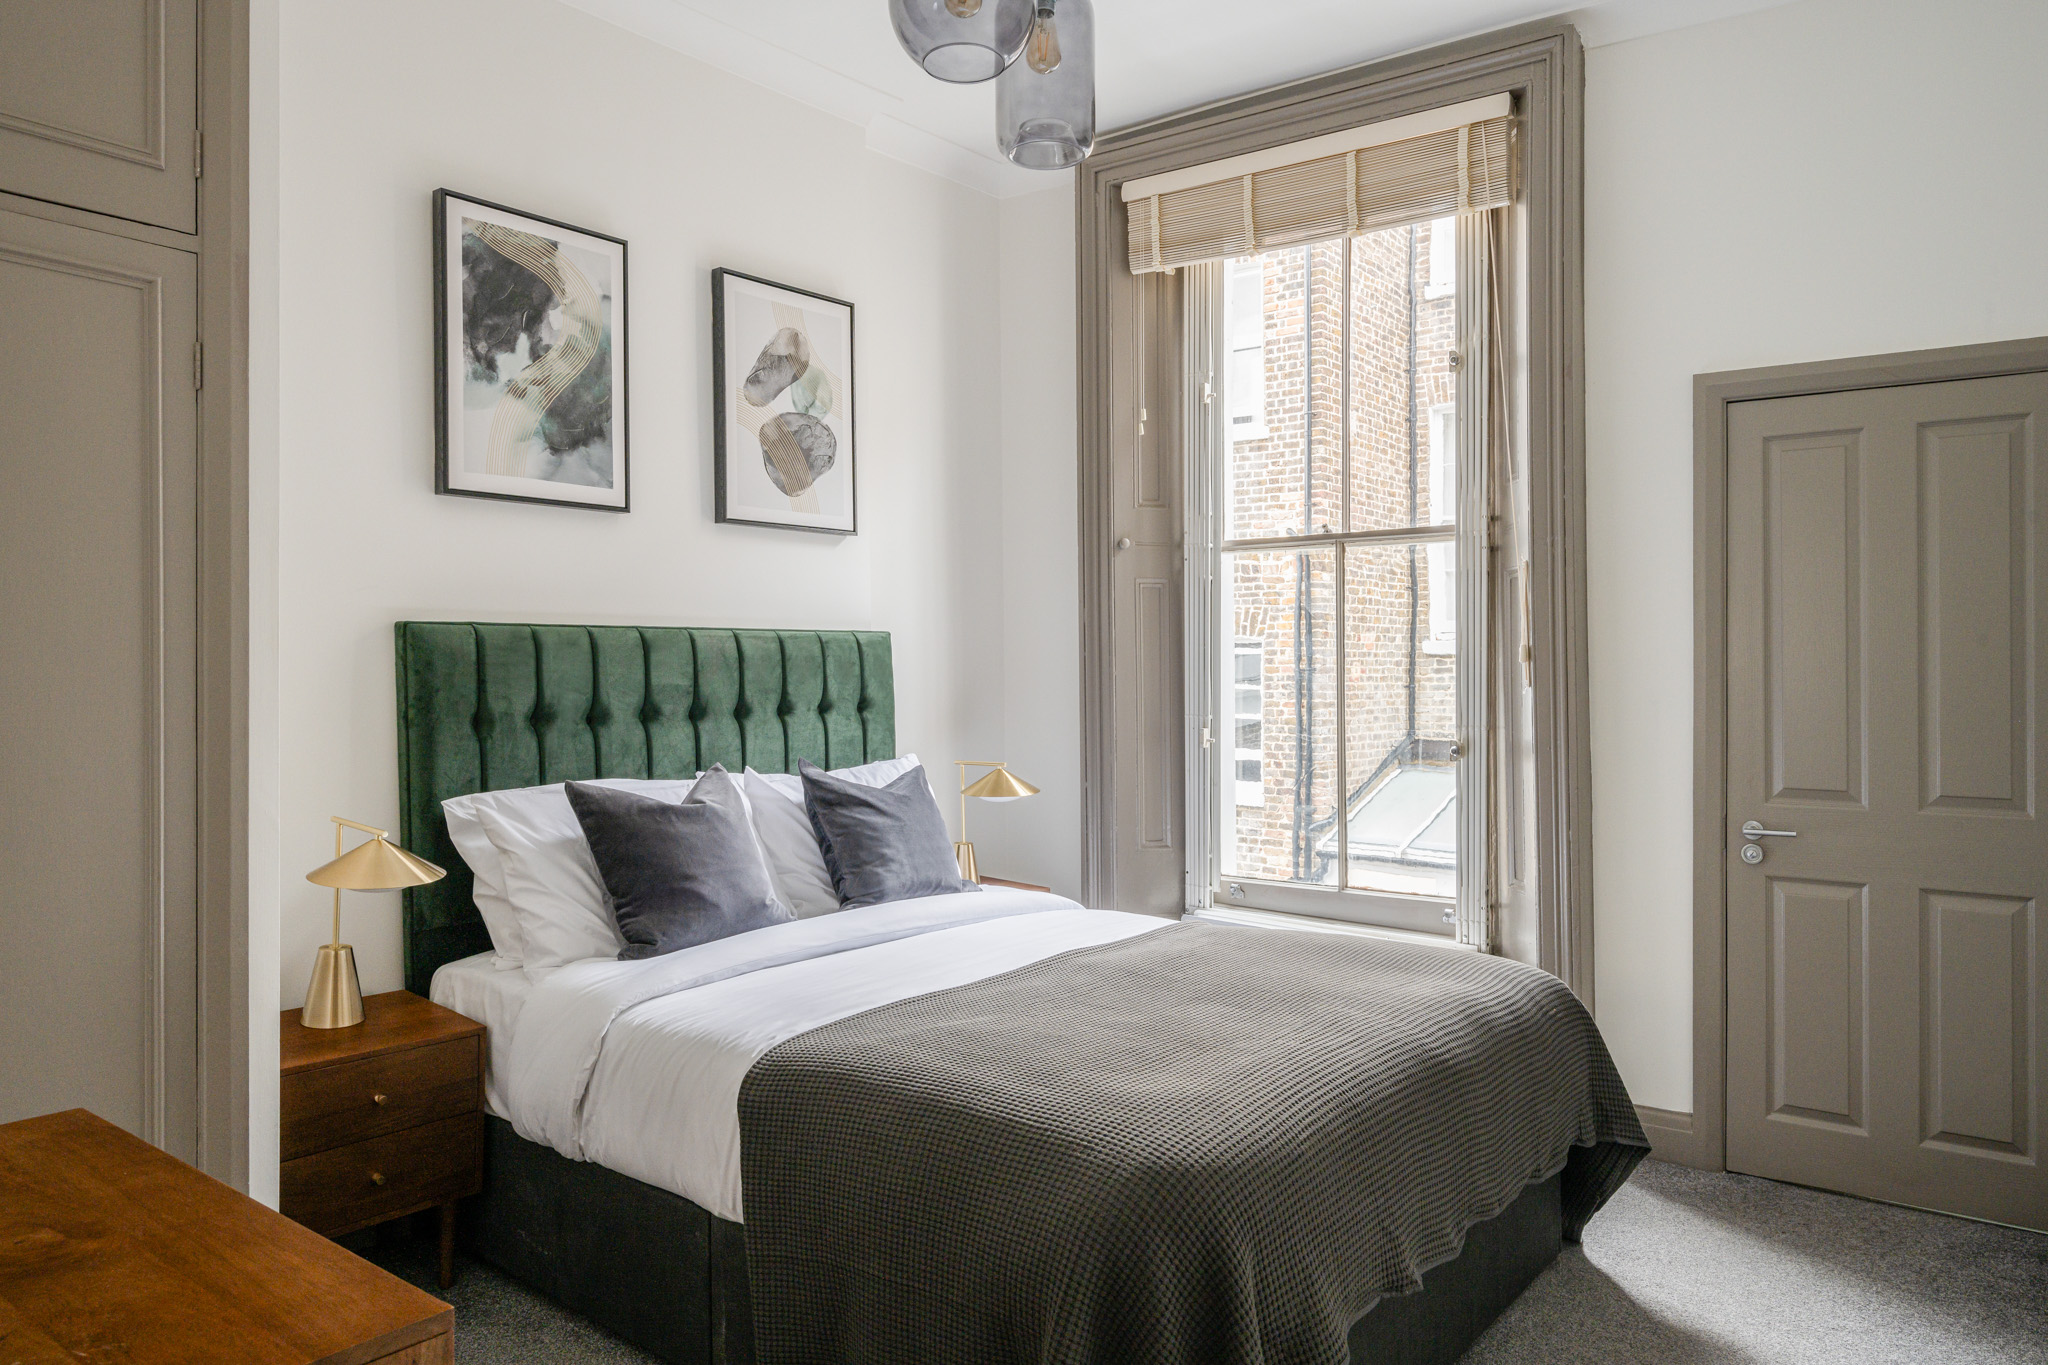 Bedroom - One Bedroom Apartment - Urban Rest Notting Hill - London